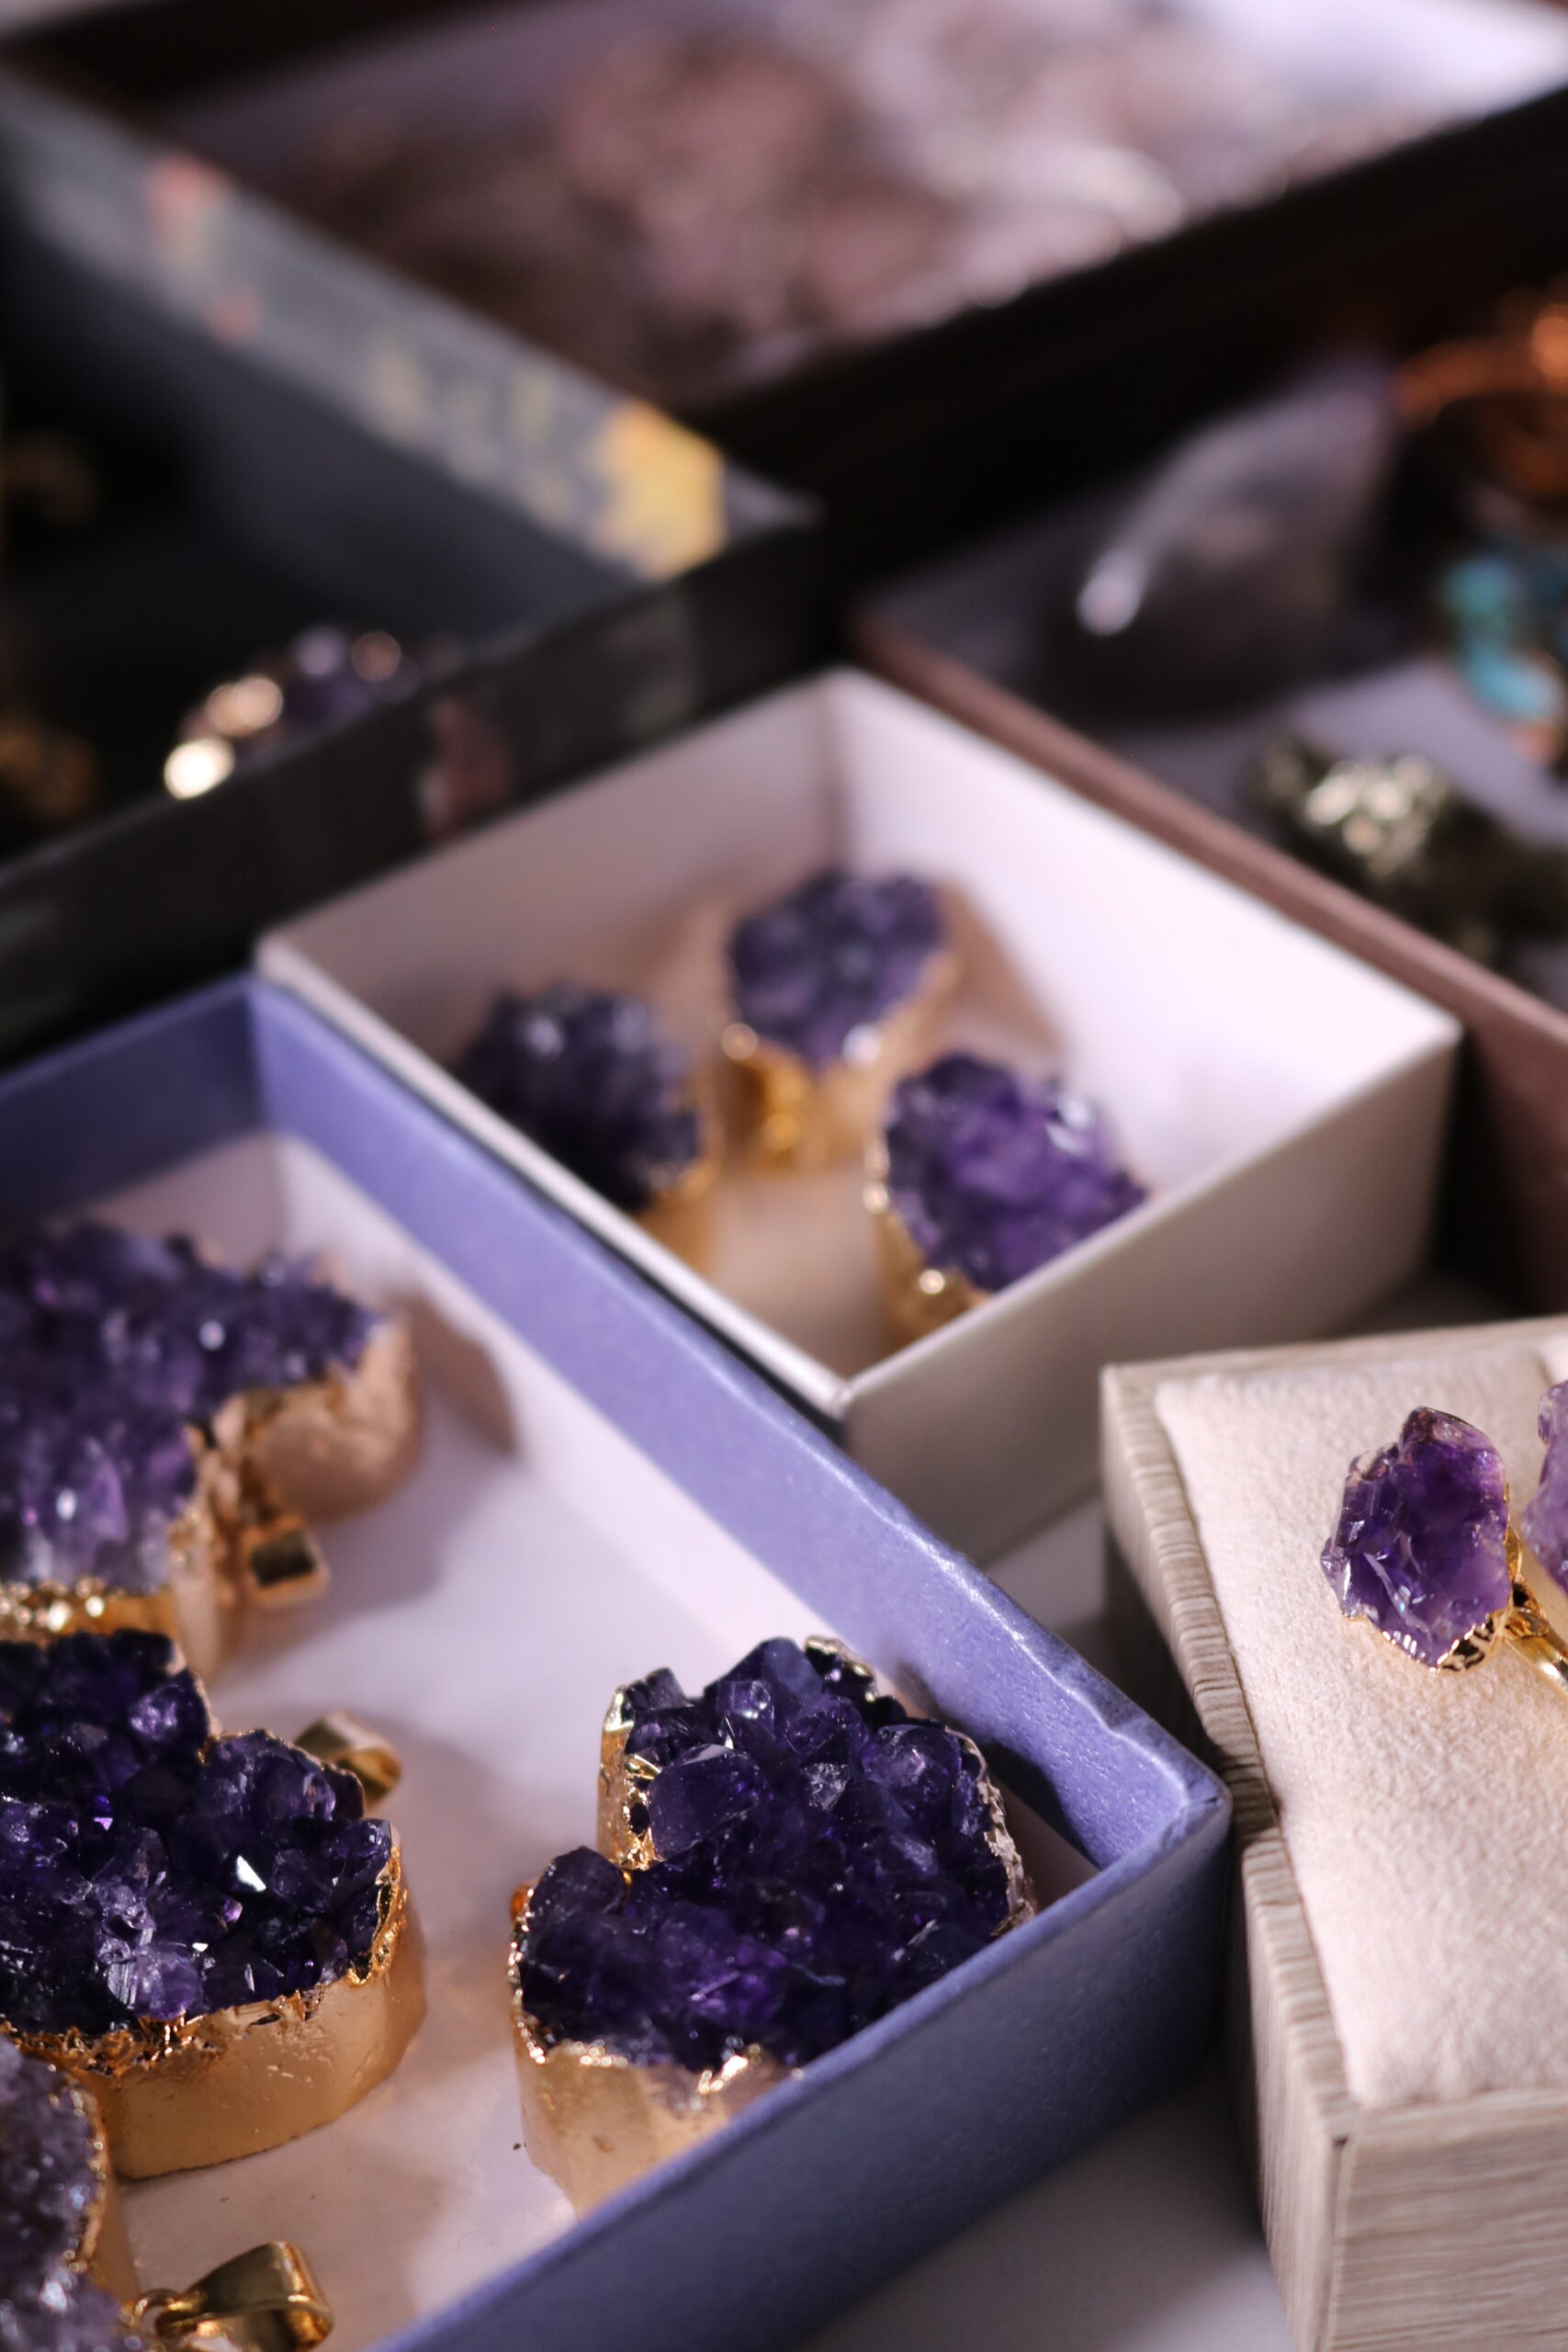 About new moon gemstones